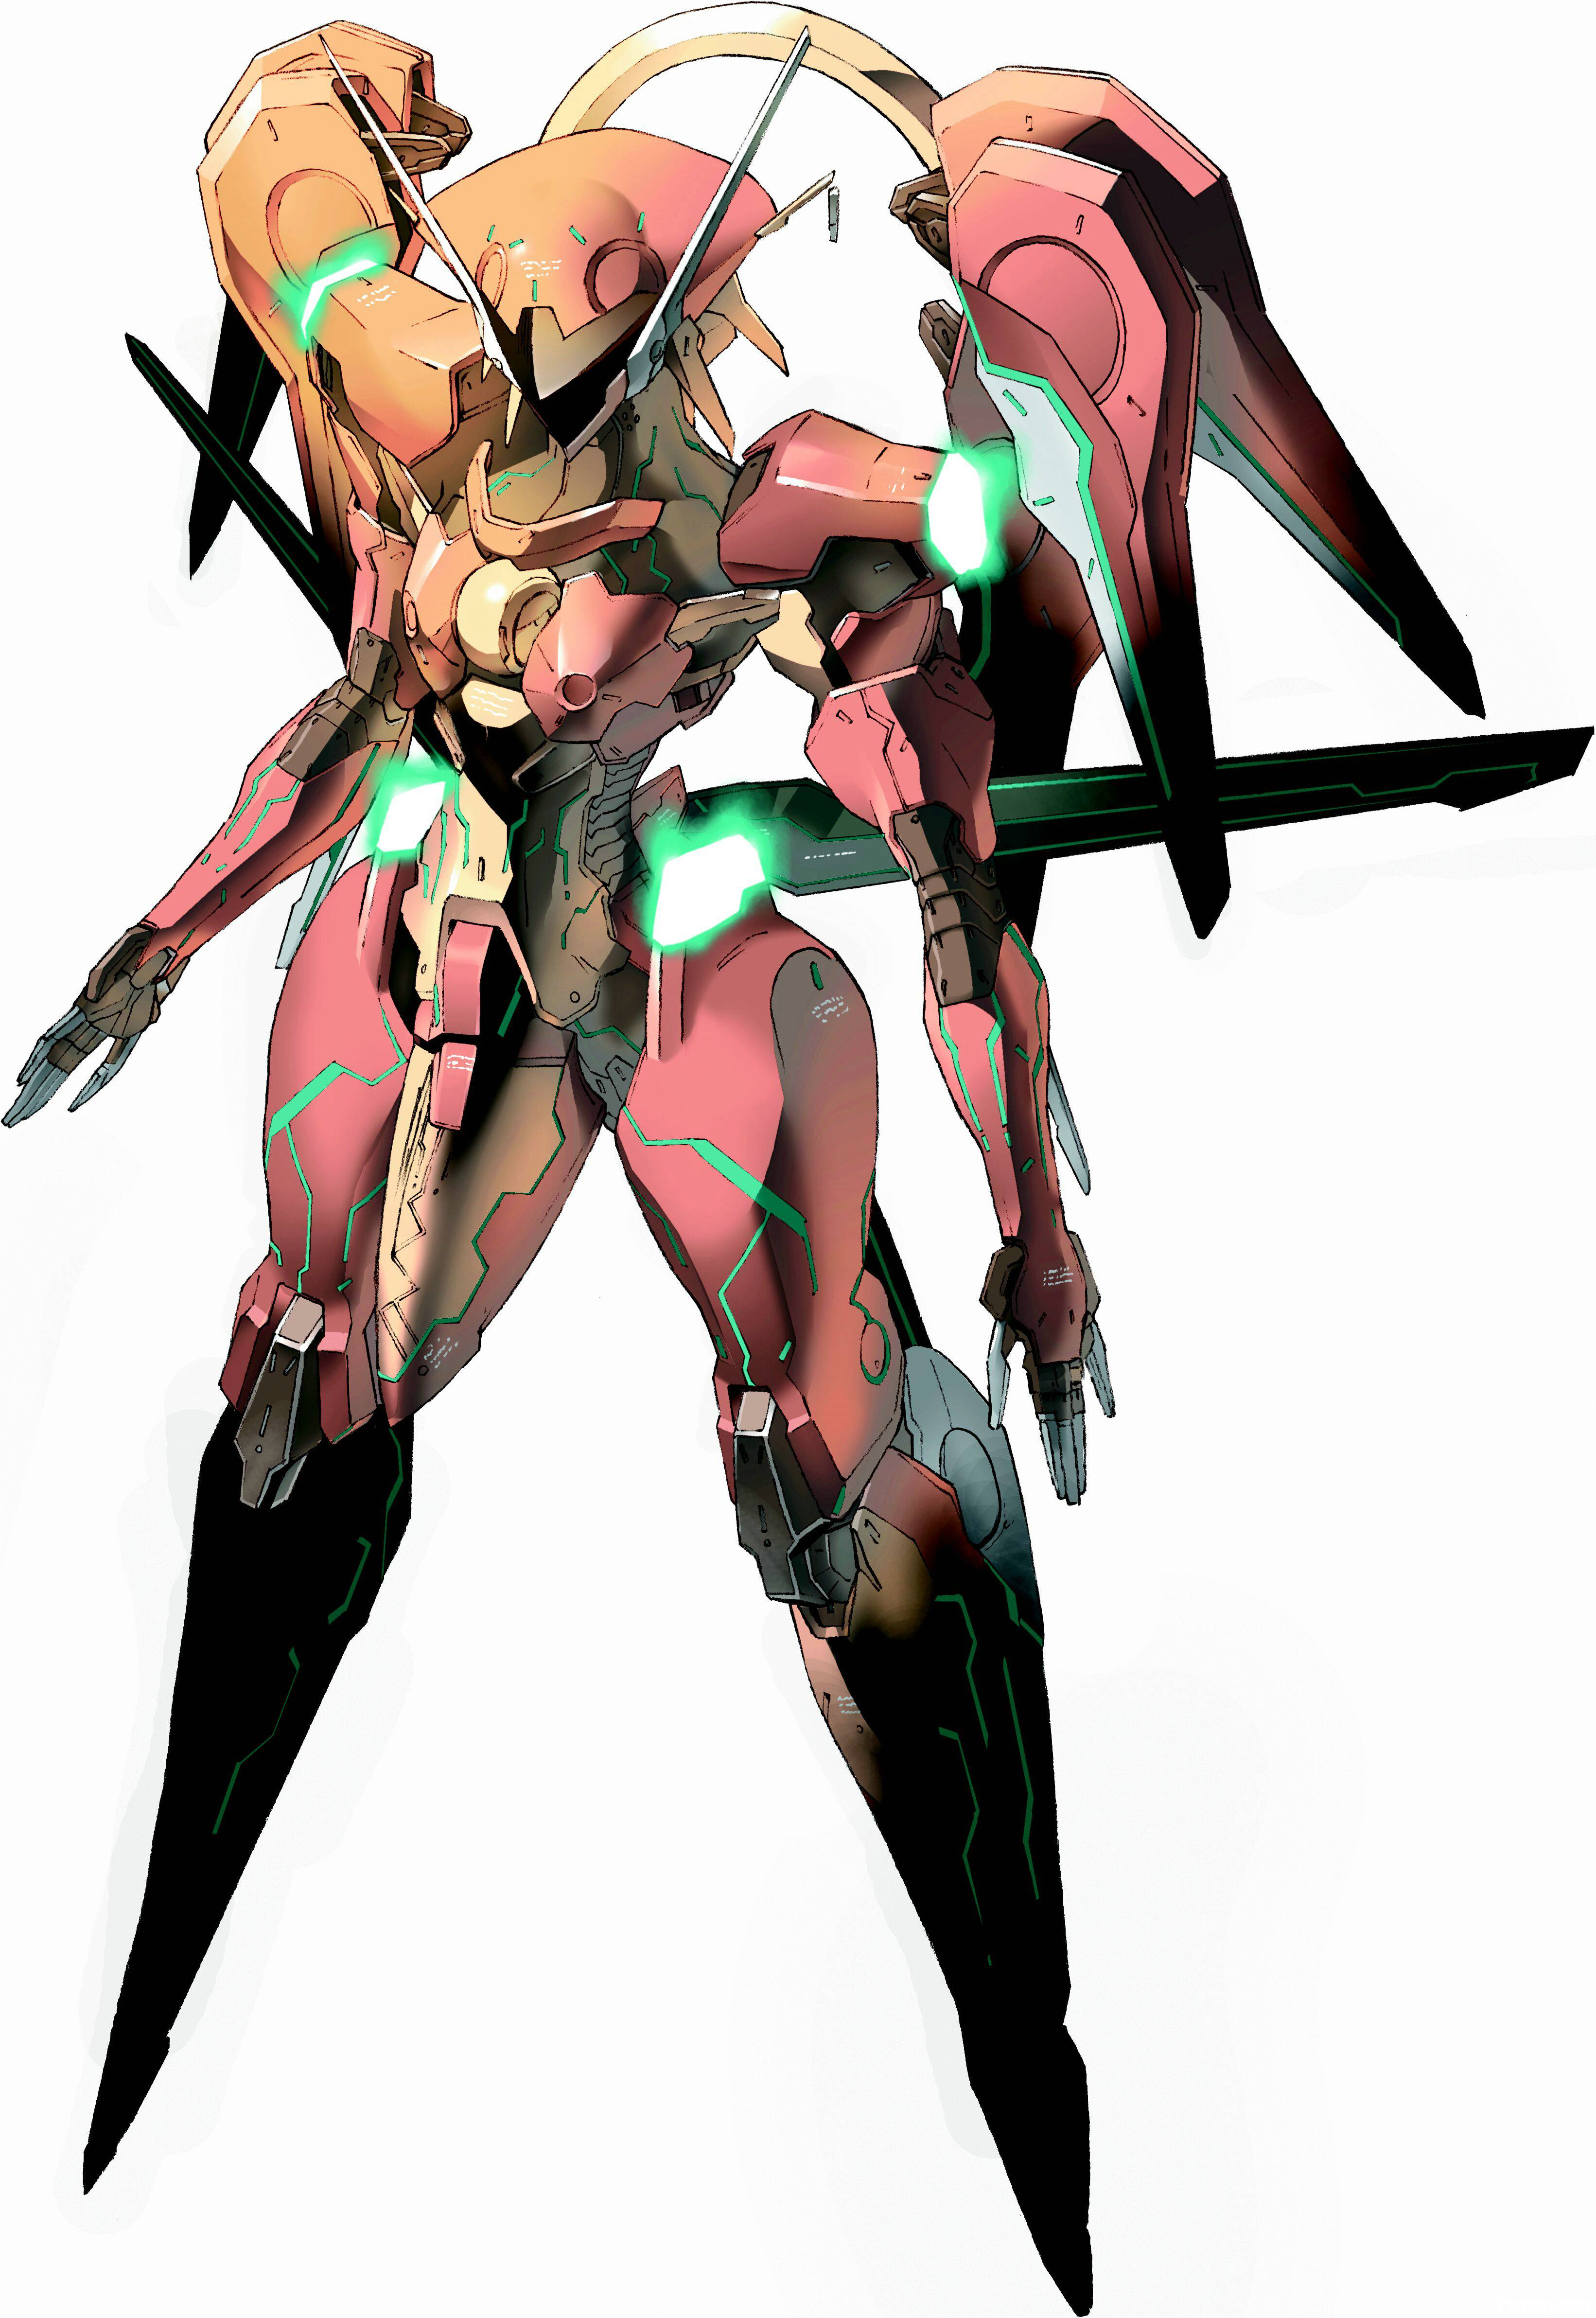 High Resolution Wallpaper | Zone Of The Enders 3283x4767 px